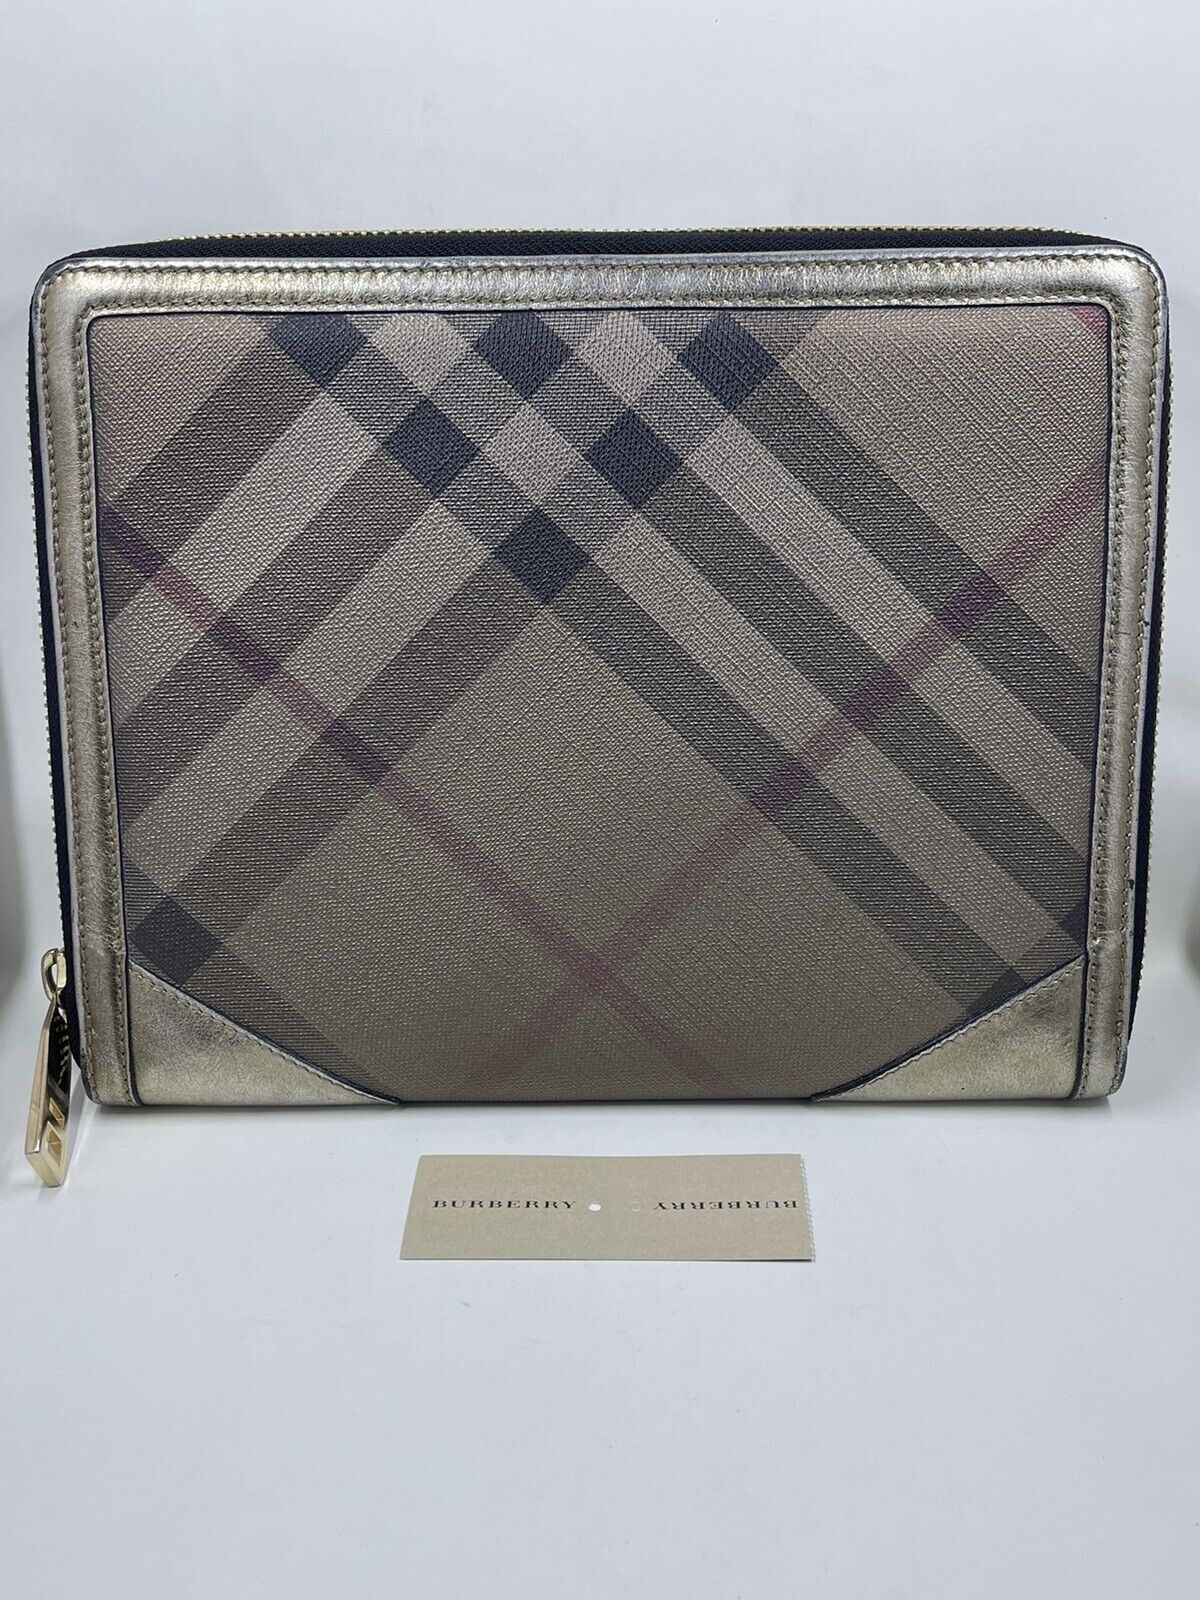 Burberry Iconic Metal Nova Check iPad Tablet Case Carrier Tech Accessory